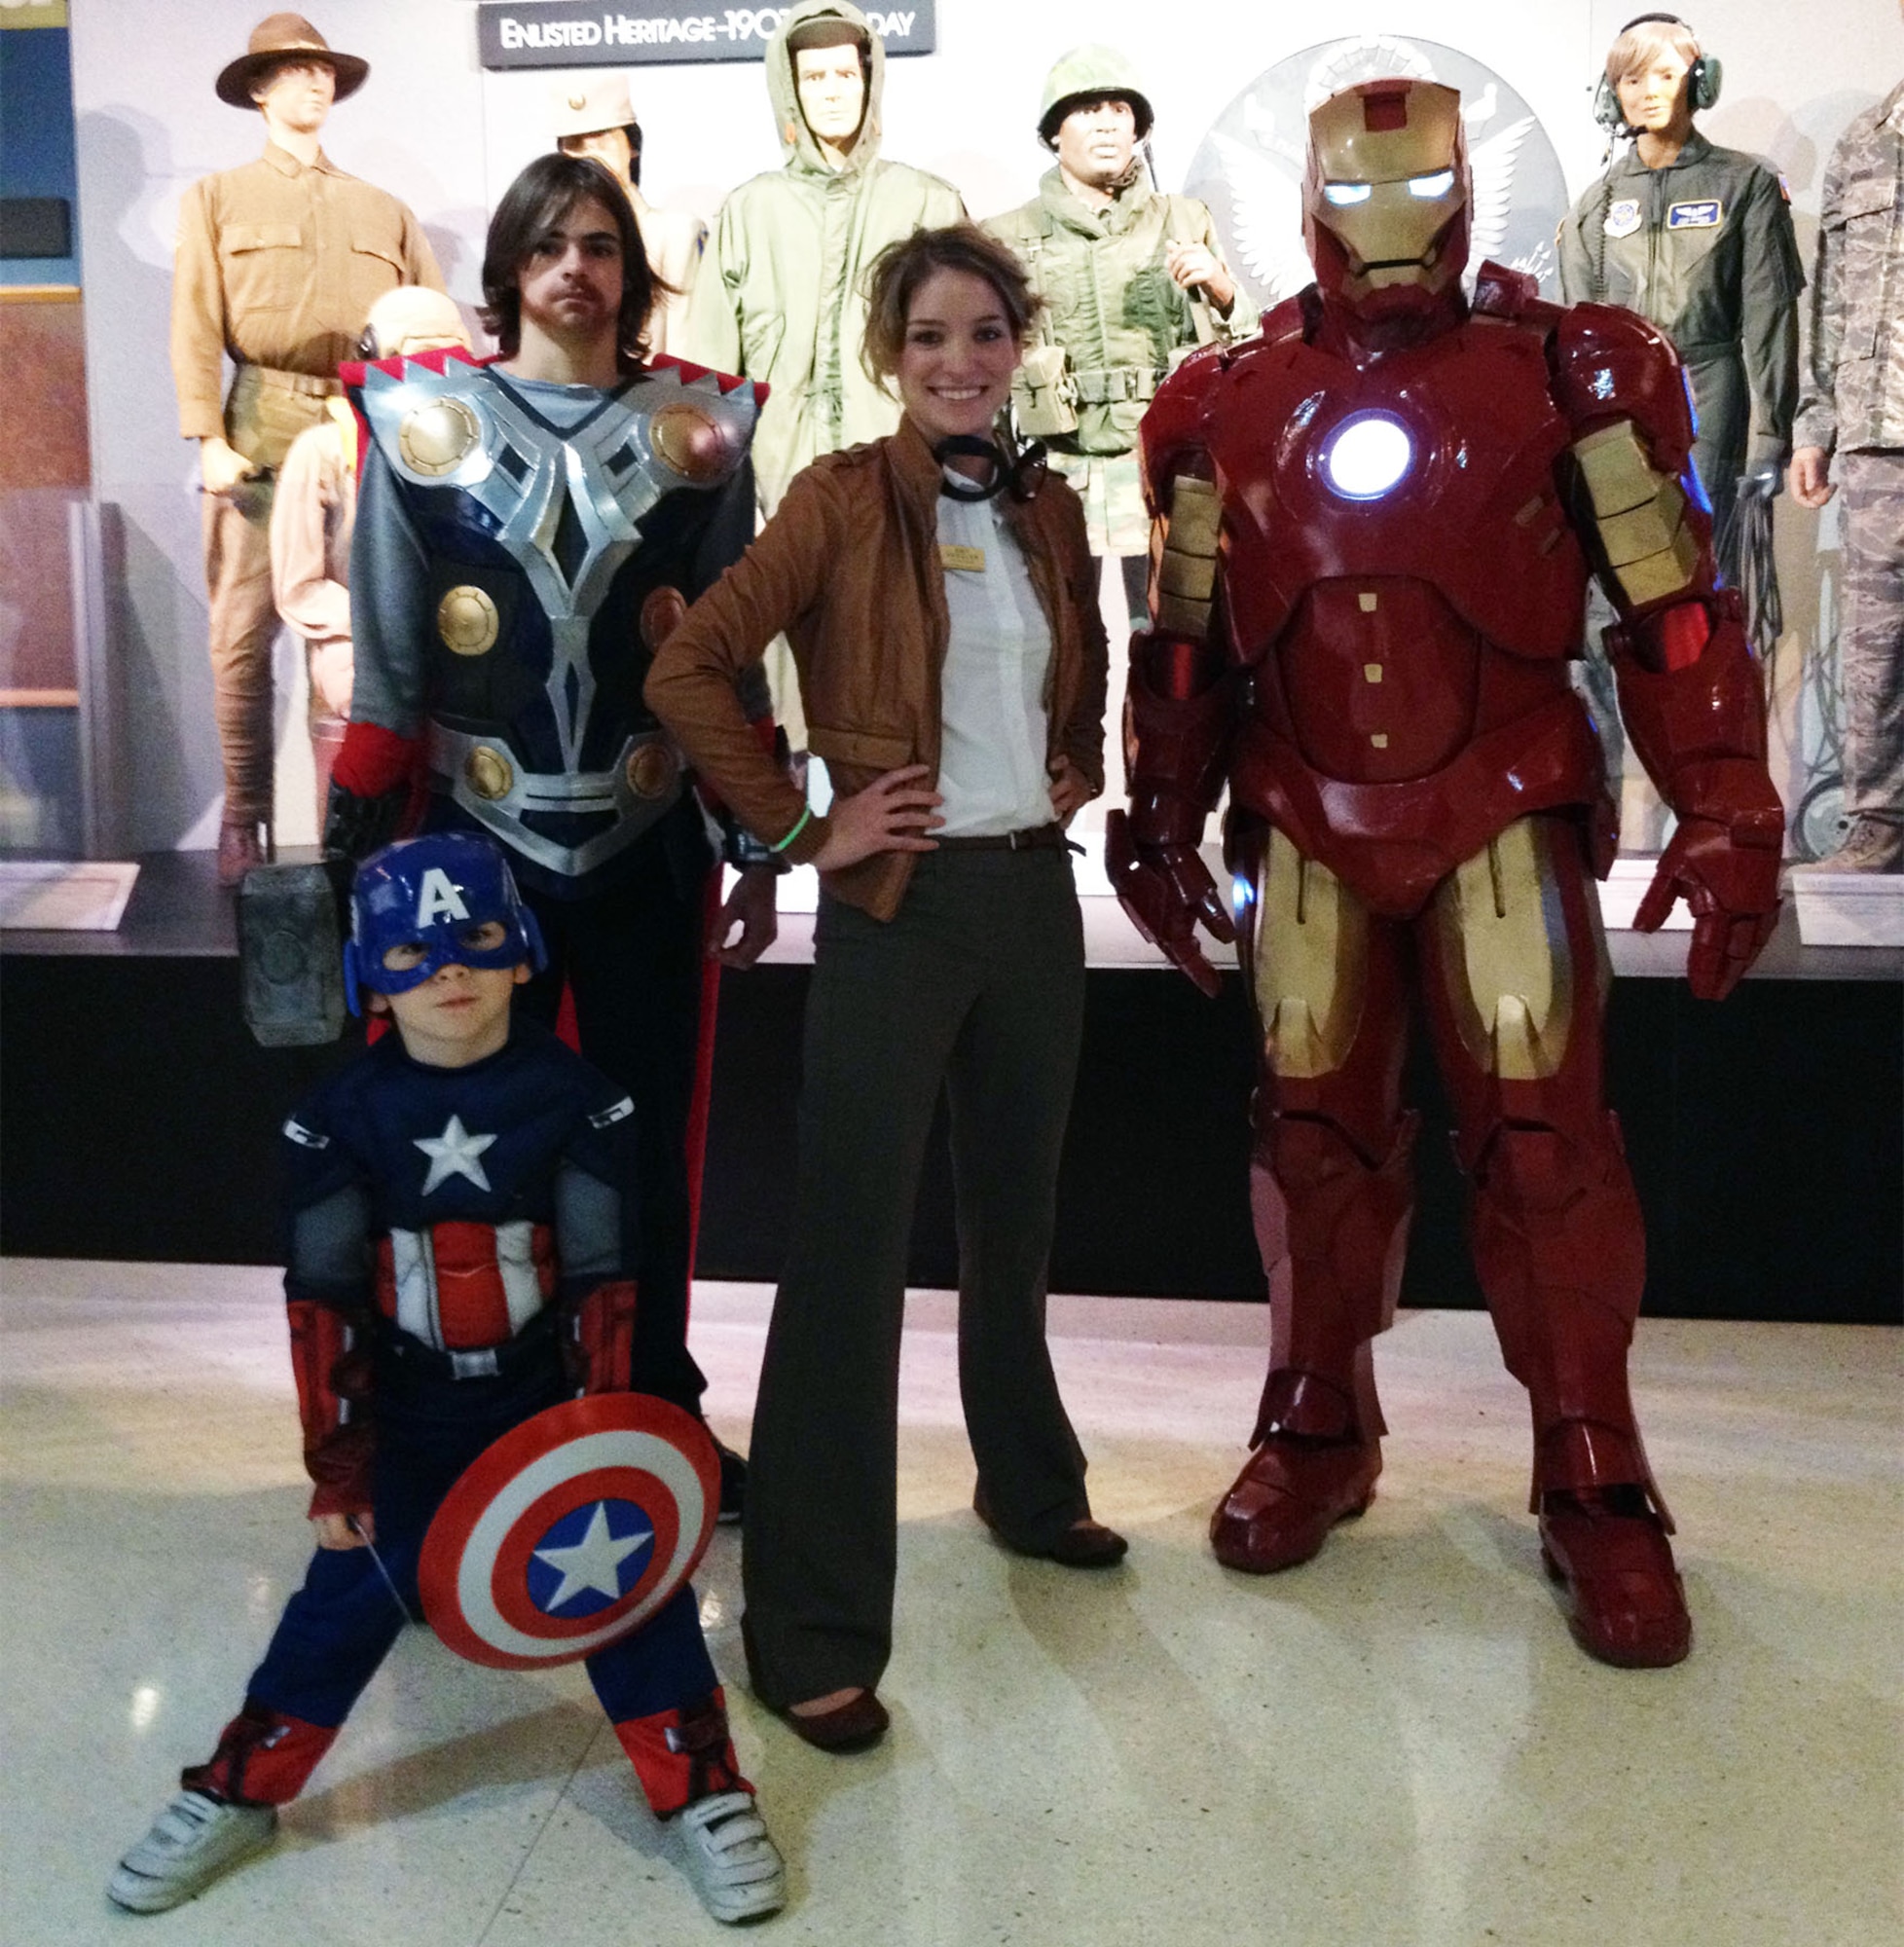 DAYTON, Ohio -- Museum visitors of all ages enjoyed dressing up in costumes and learning about aerospace principles through Halloween-themed activities during Family Day at the National Museum of the U.S. Air Force. (U.S. Air Force photo)